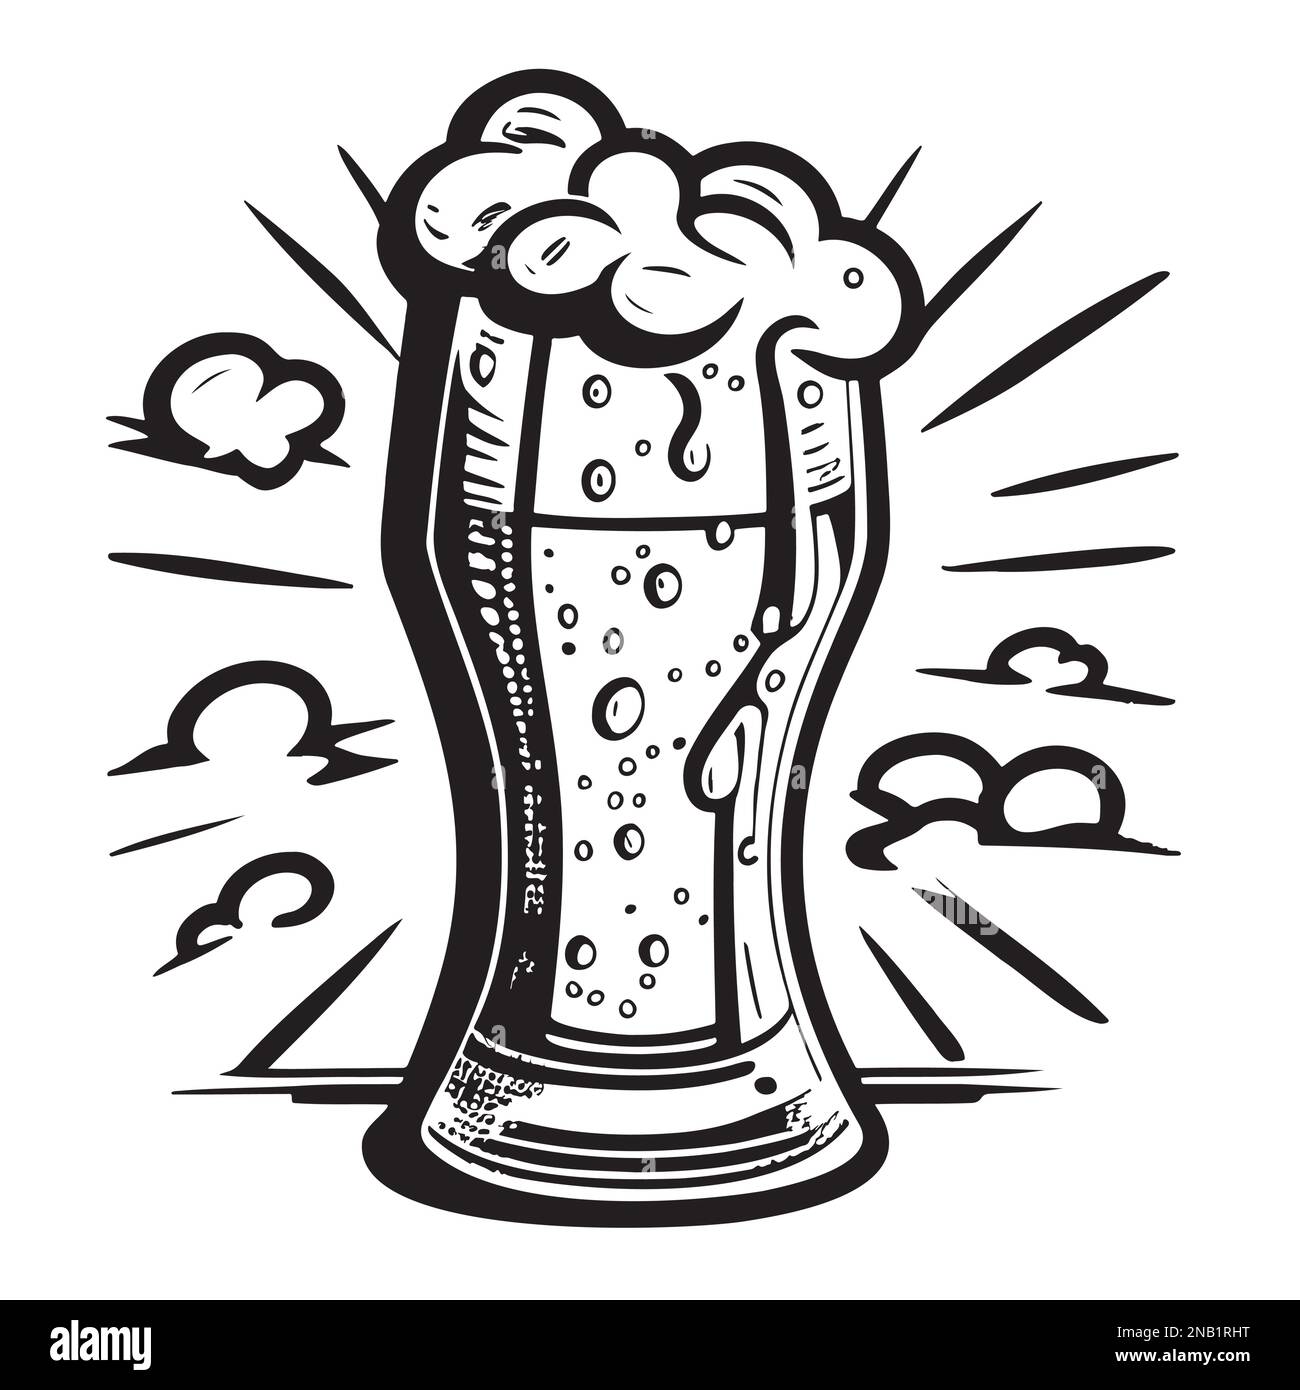 Glass of beer with foam hand drawn sketch illustration Cartoon Stock Vector